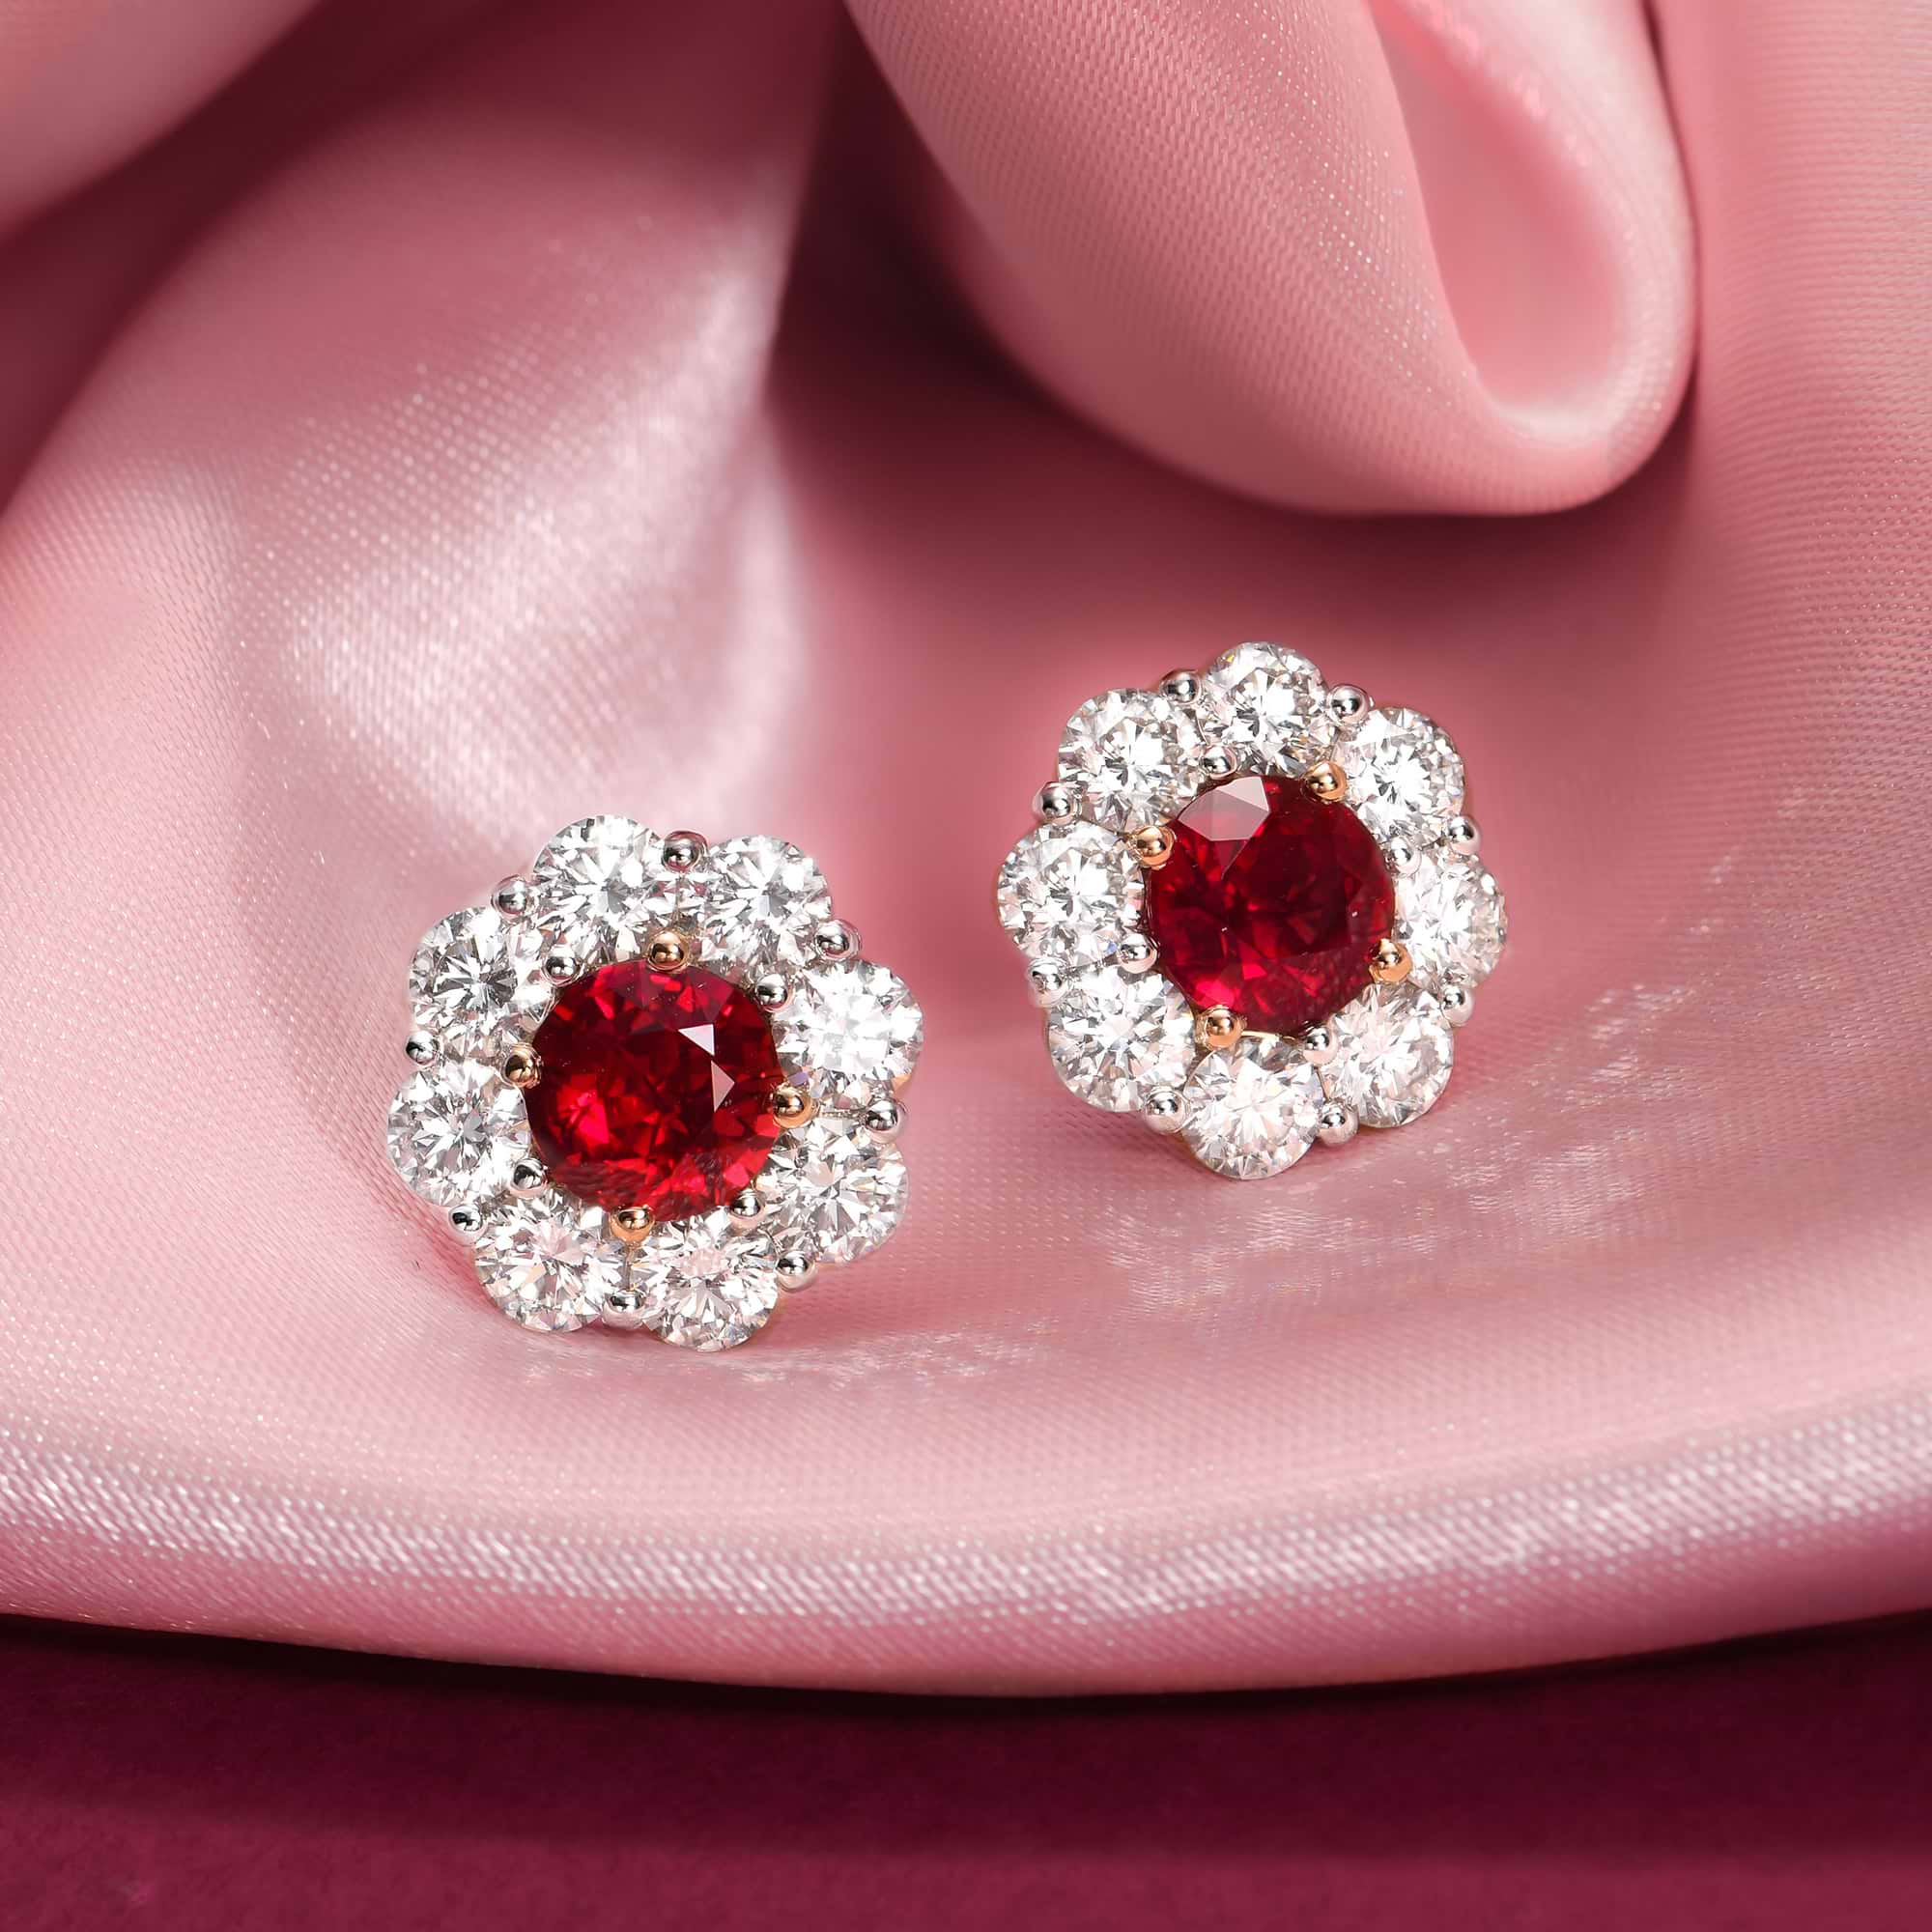 LEIBISH Mozambique Pigeon Blood Ruby & Diamond Floral Halo Earrings